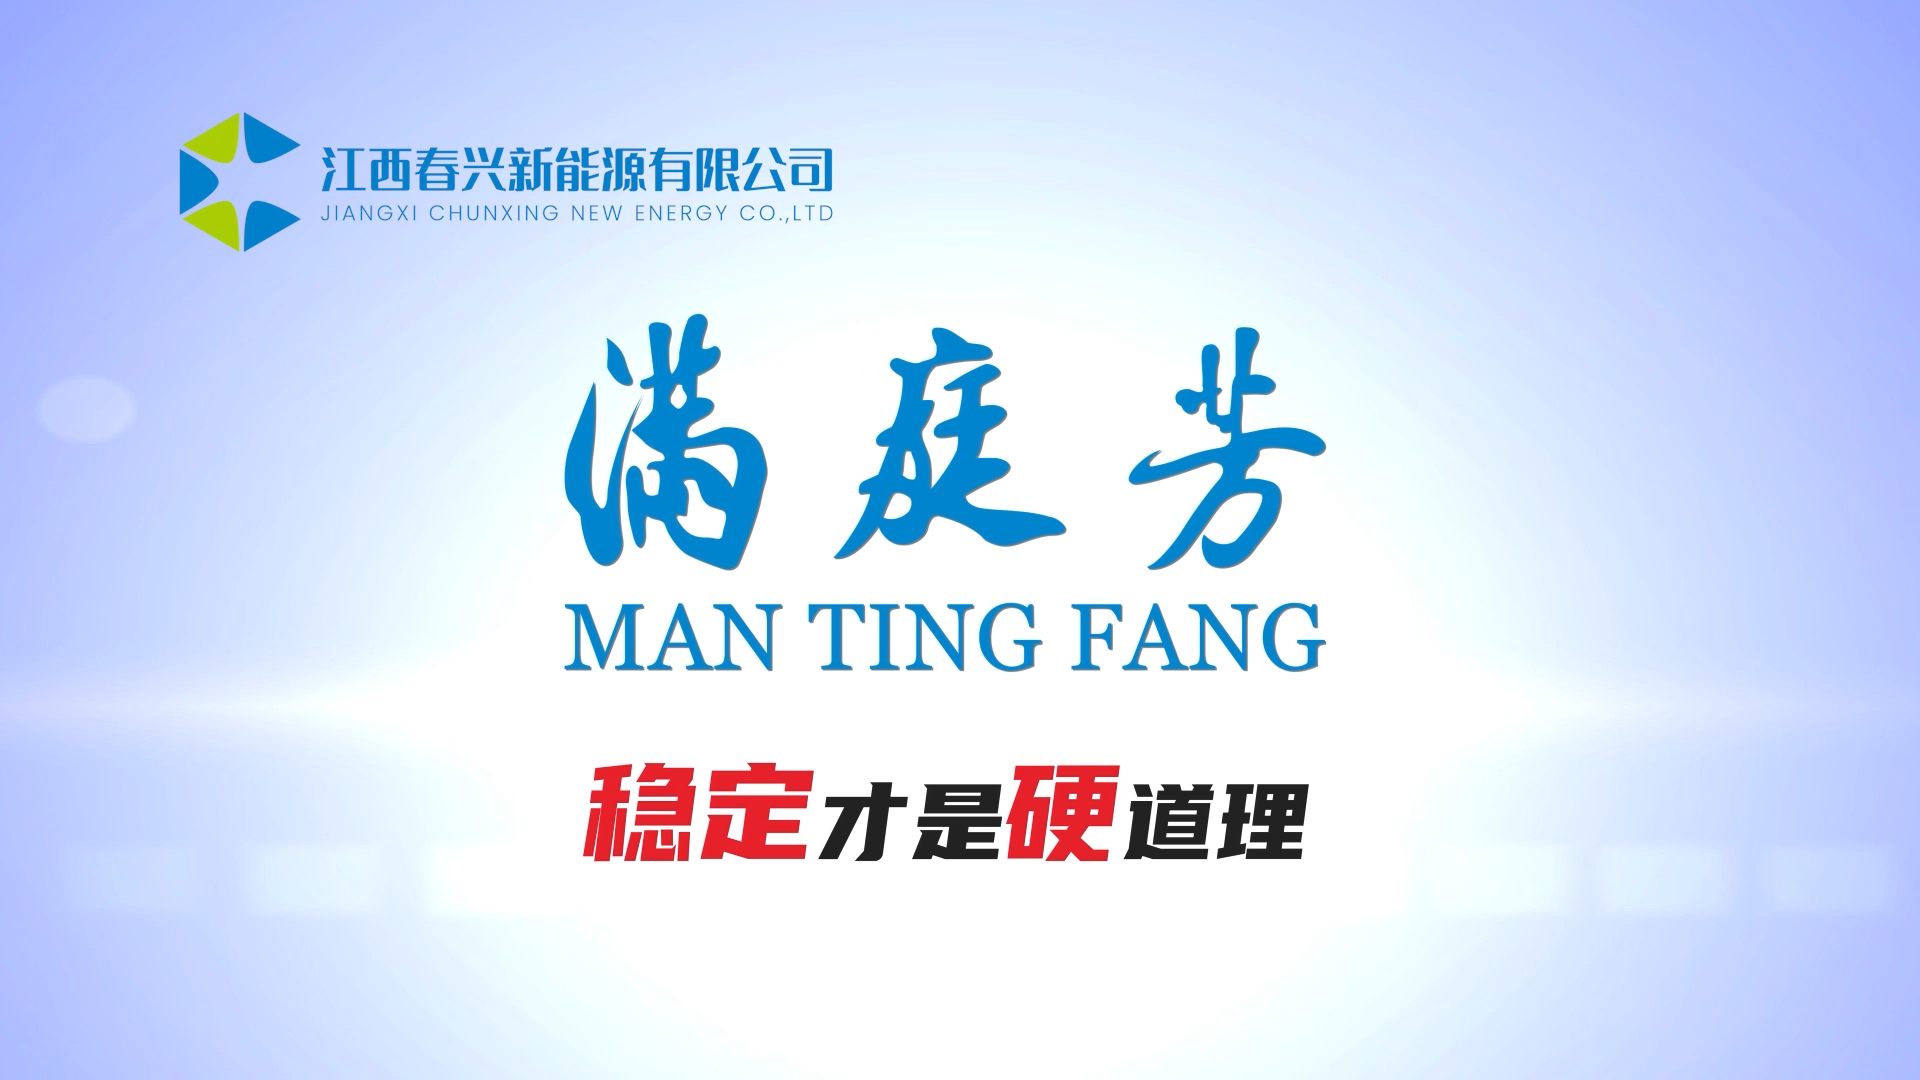 Man TING FANG battery - stability is the absolute principle!